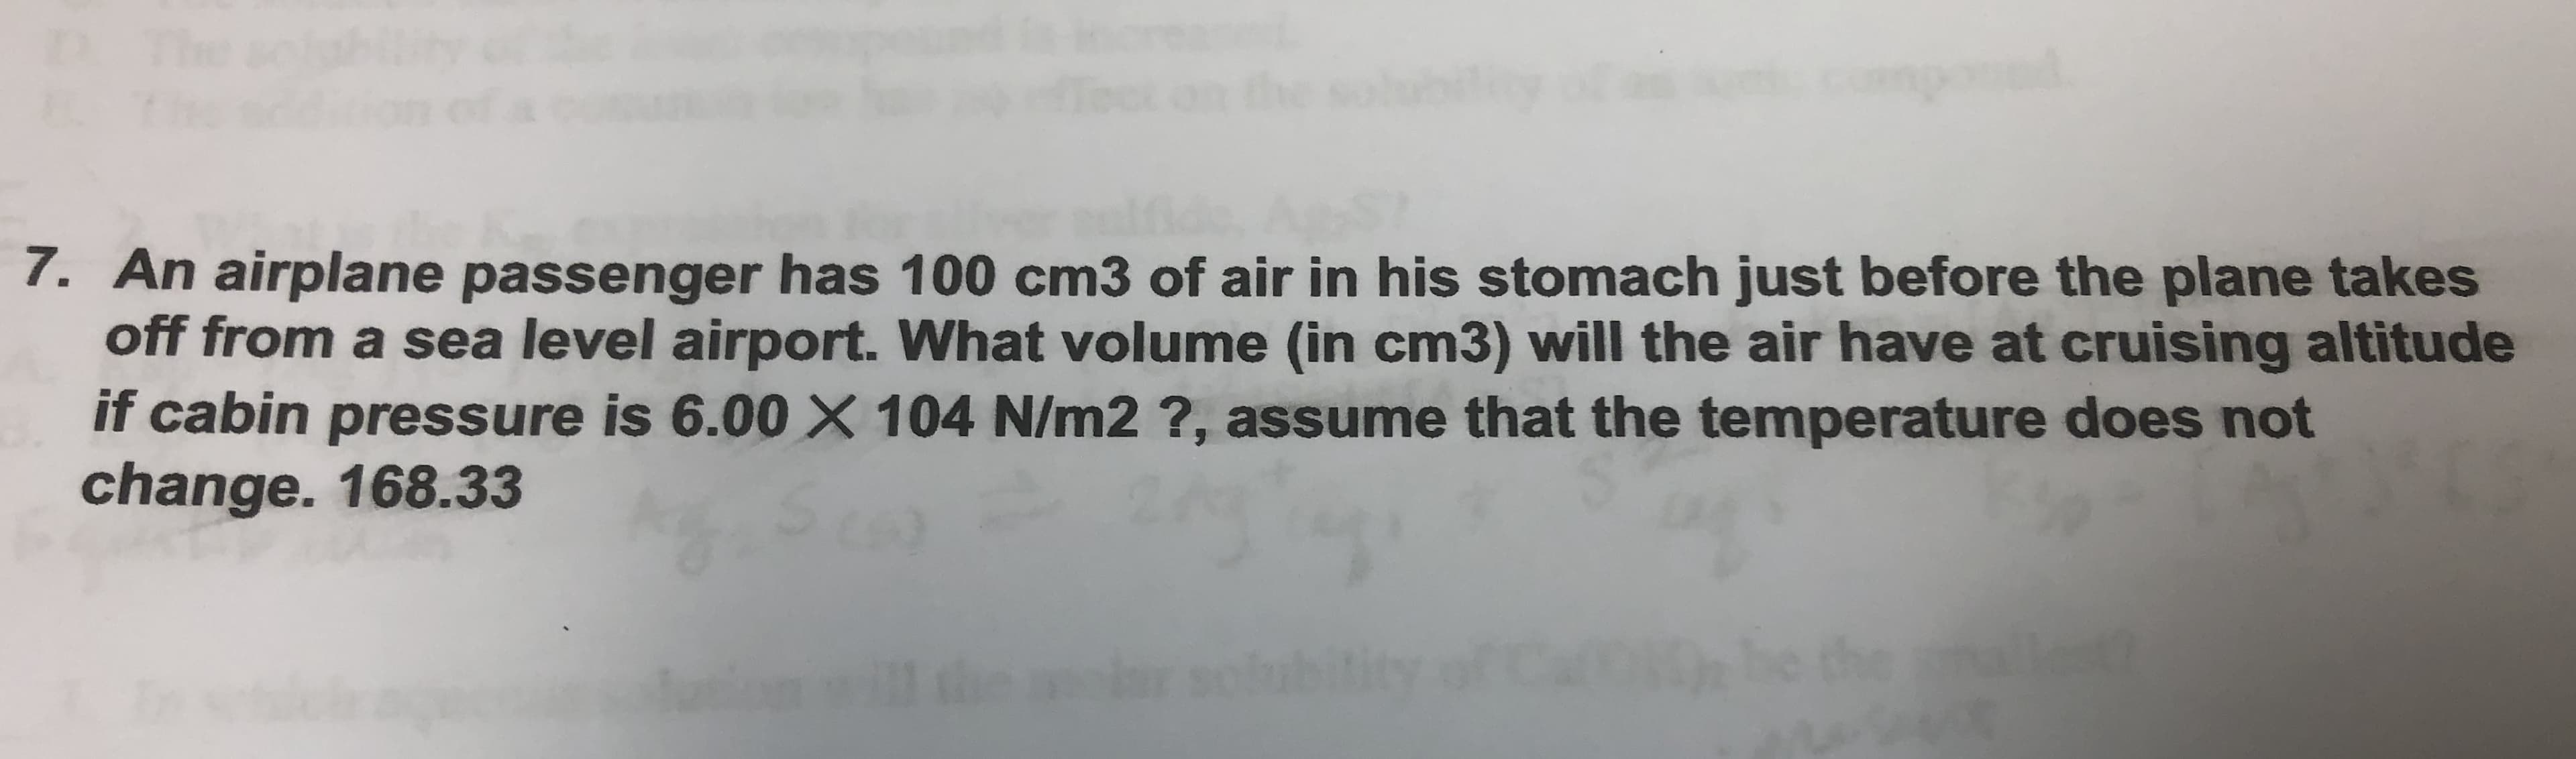 7. An airplane passenger has 100 cm3 of air in his stomach just before the plane takes
off from a sea level airport. What volume (in cm3) will the air have at cruising altitude
if cabin pressure is 6.00 X 104 N/m2 ?, assume that the temperature does not
change. 168.33
